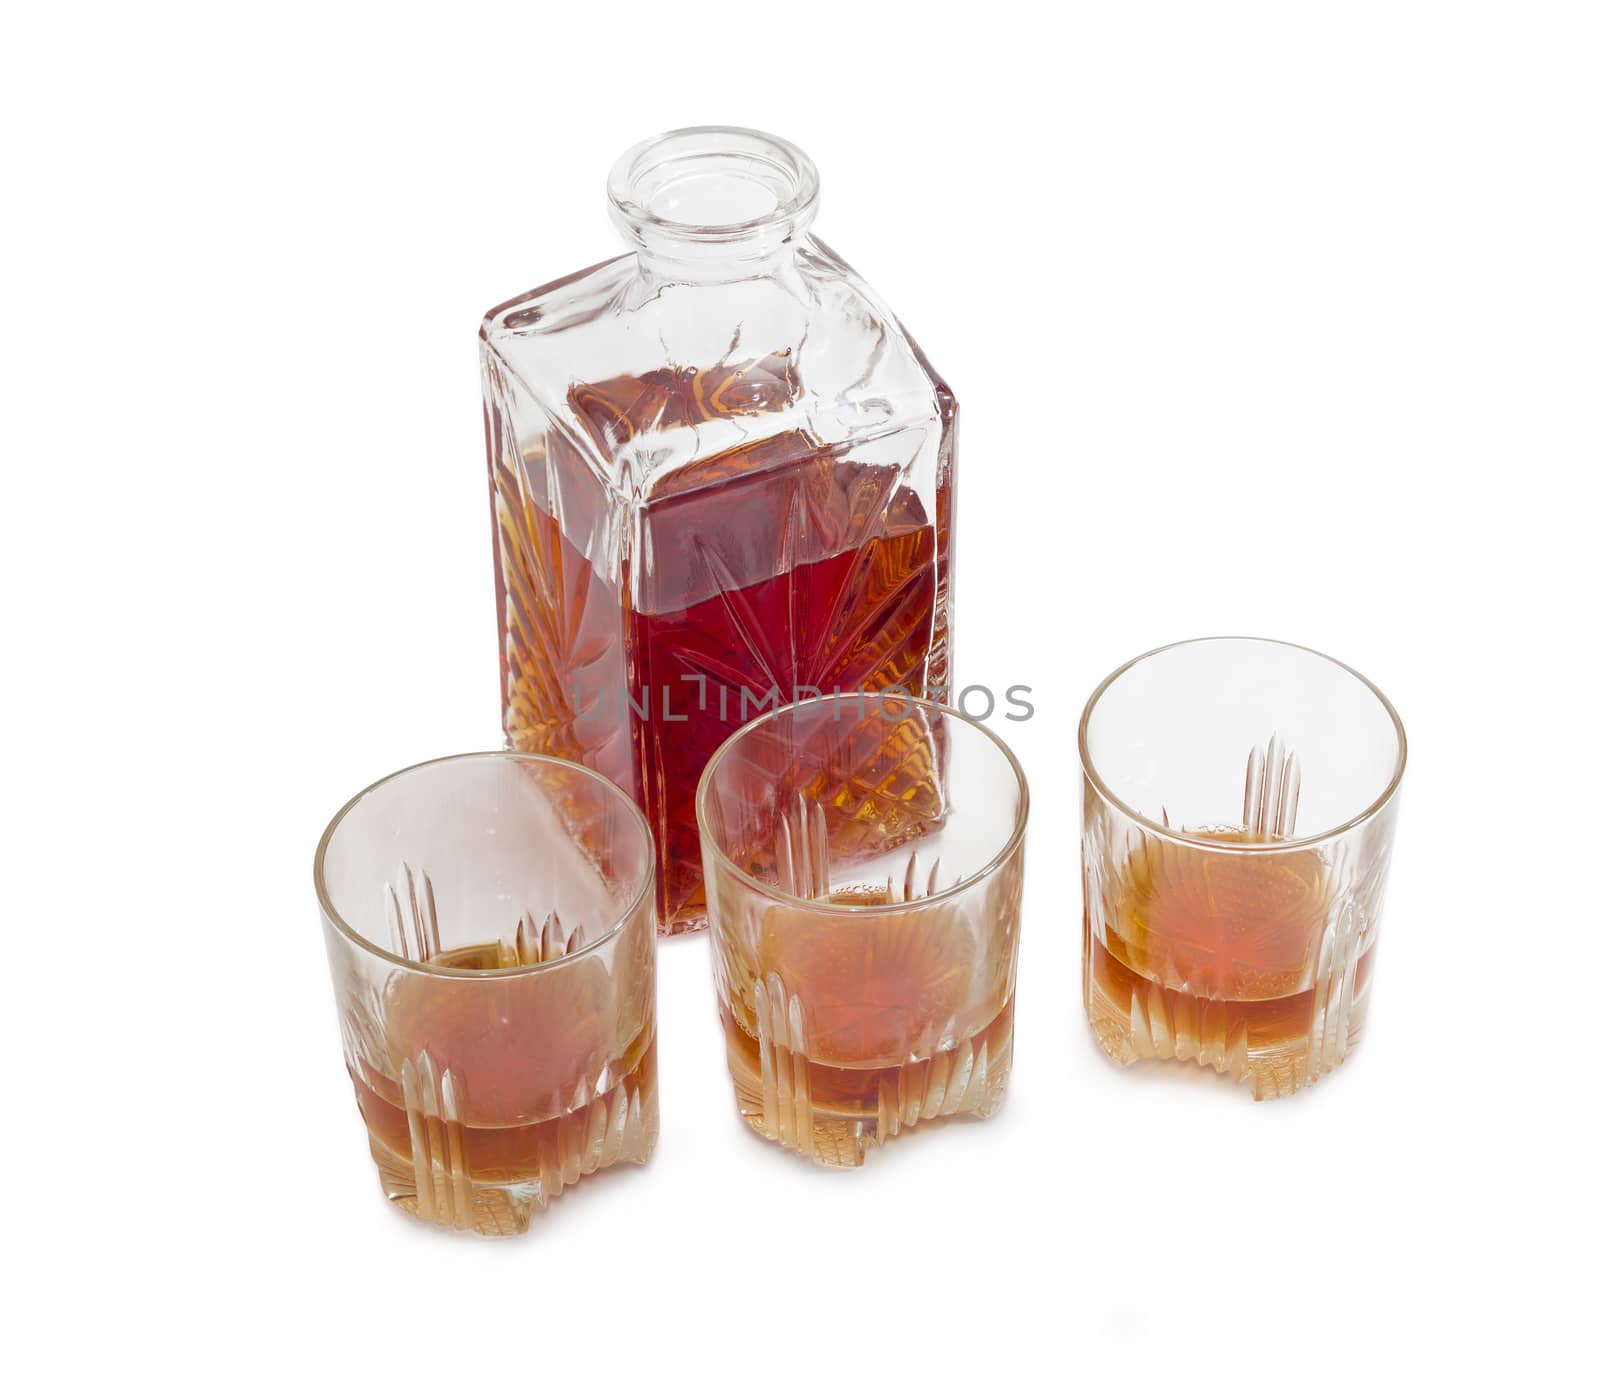 Decanter and three glasses with whiskey on a light background by anmbph